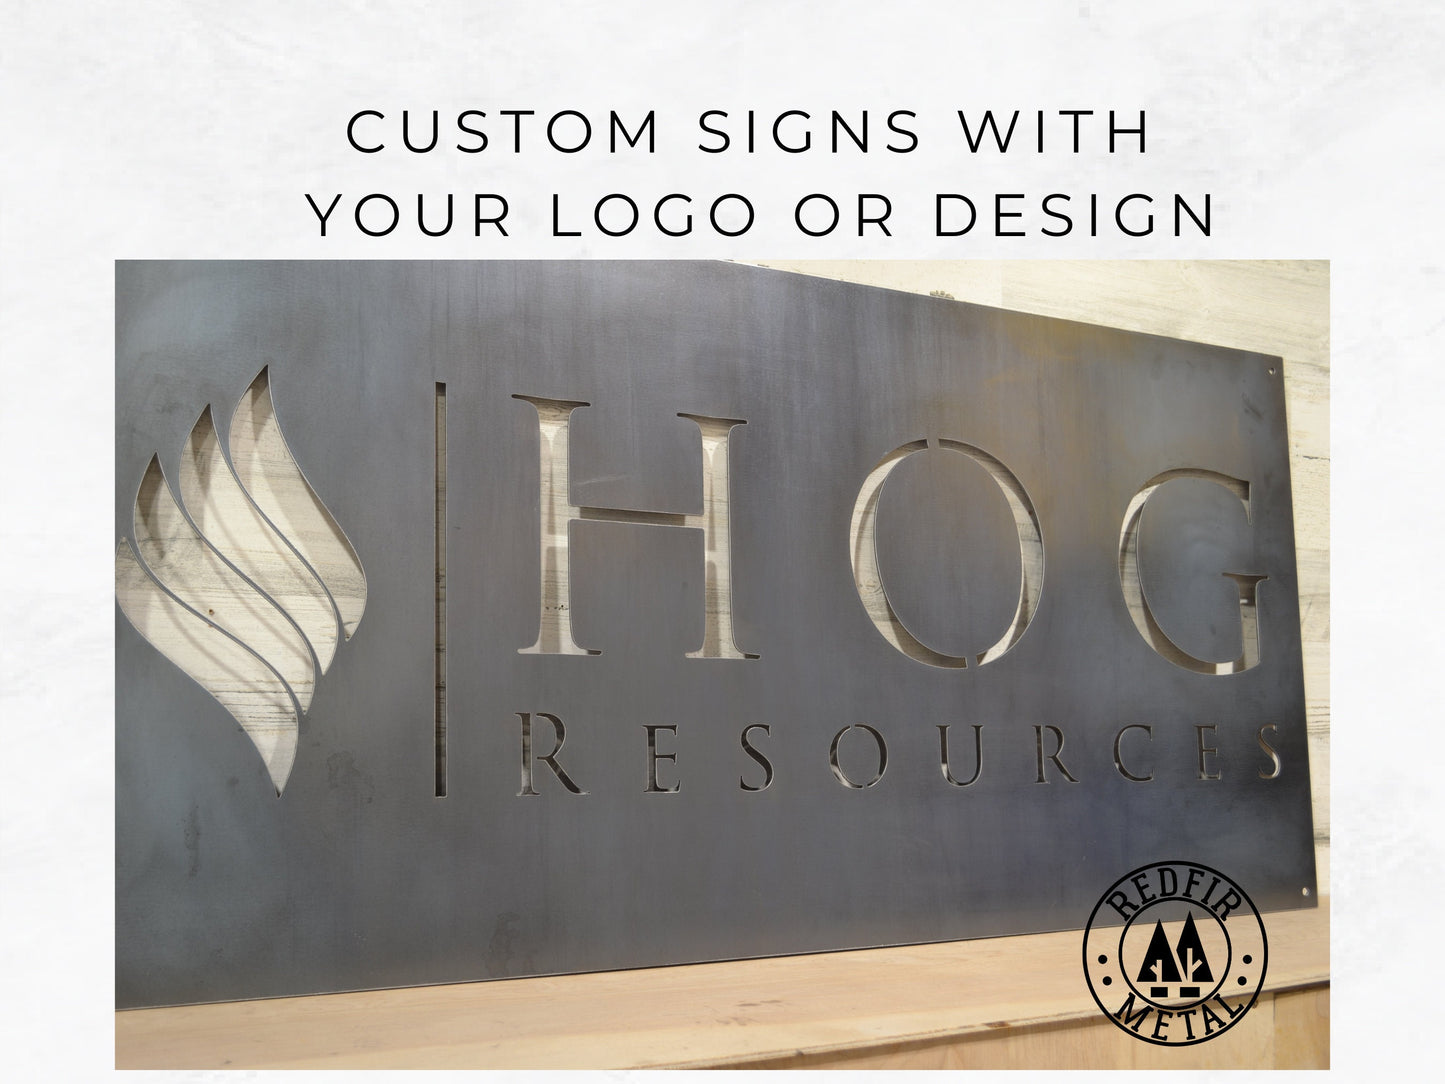 Personalized Ranch - Logo - Metal Art Signs - Your Logo or Design - Custom Sign - Wedding Gifts - Metal Wall Decor - Address Sign